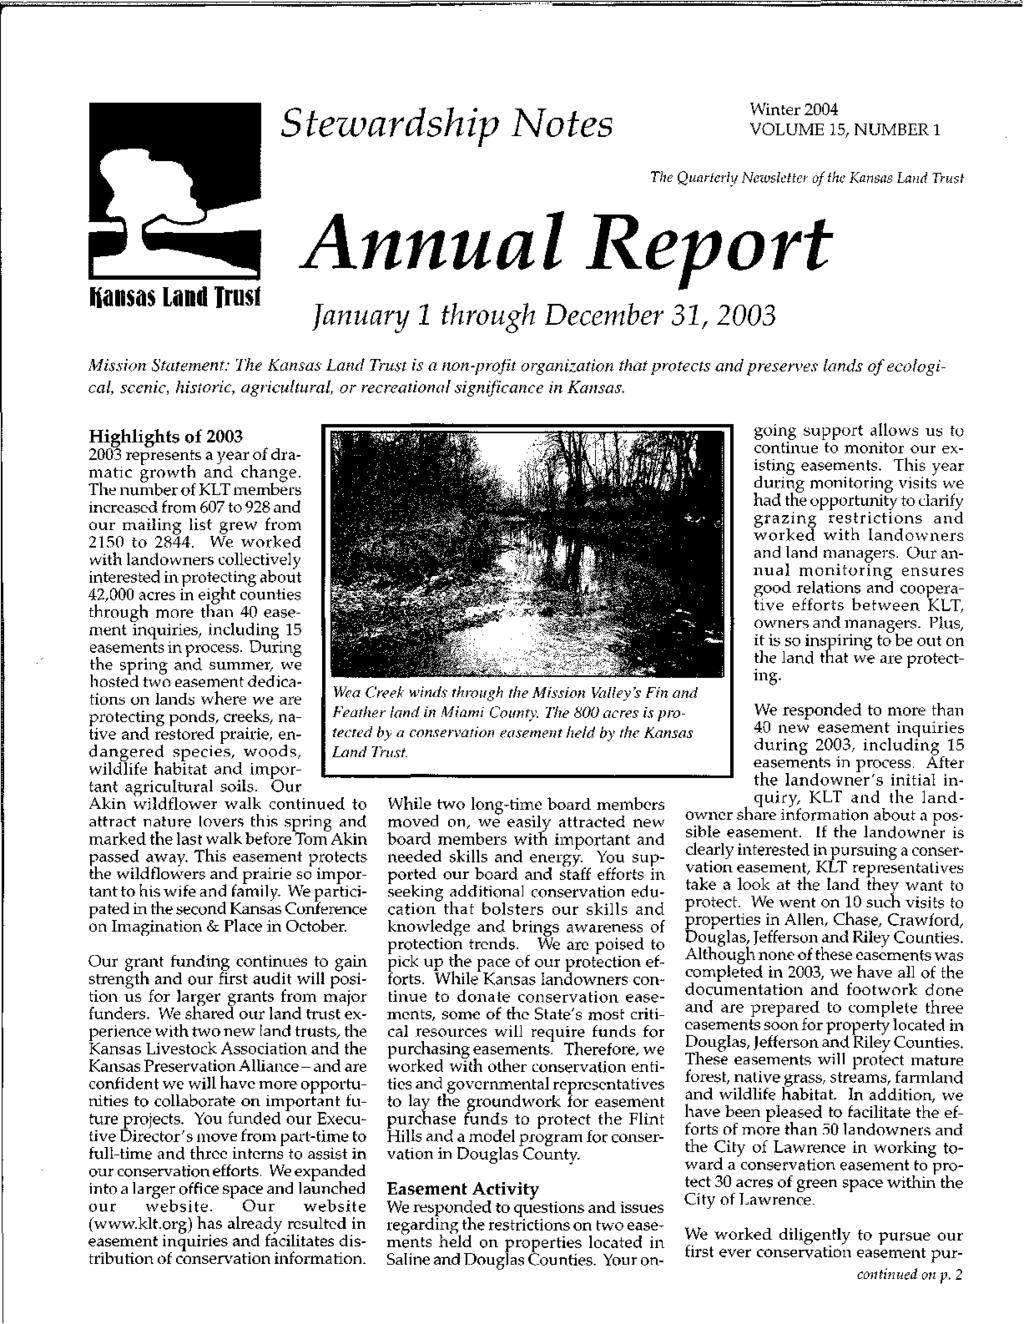 Stezvardship}Votes Winter 2004 VOLUME 15, NUMBER 1 The Quarterly Newsletter of the Kansas Land Trust al o January 1 through December 31, 2003 Mission ~tate~en~: The ~ansas Land Trust is a non-profit